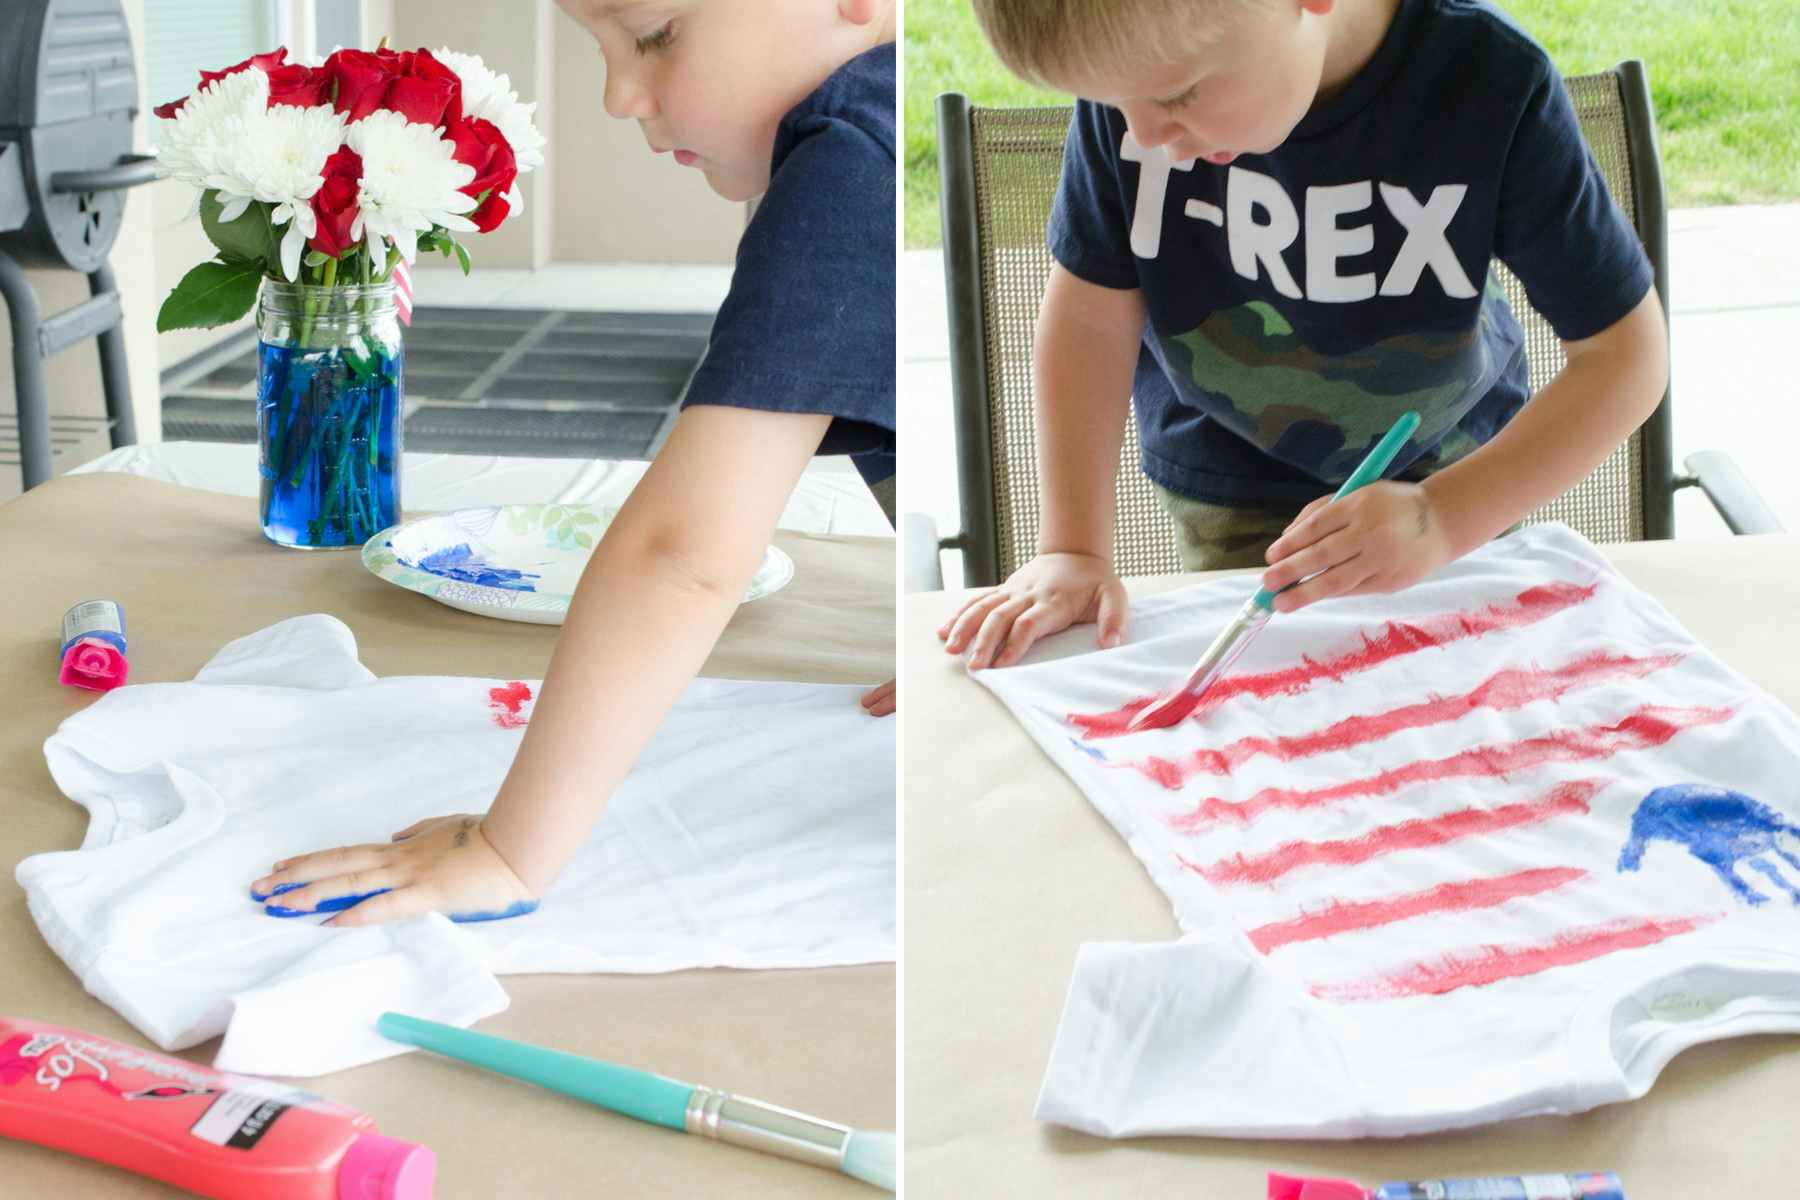 A boy placing his painted hand on a white shirt to create an American flag design